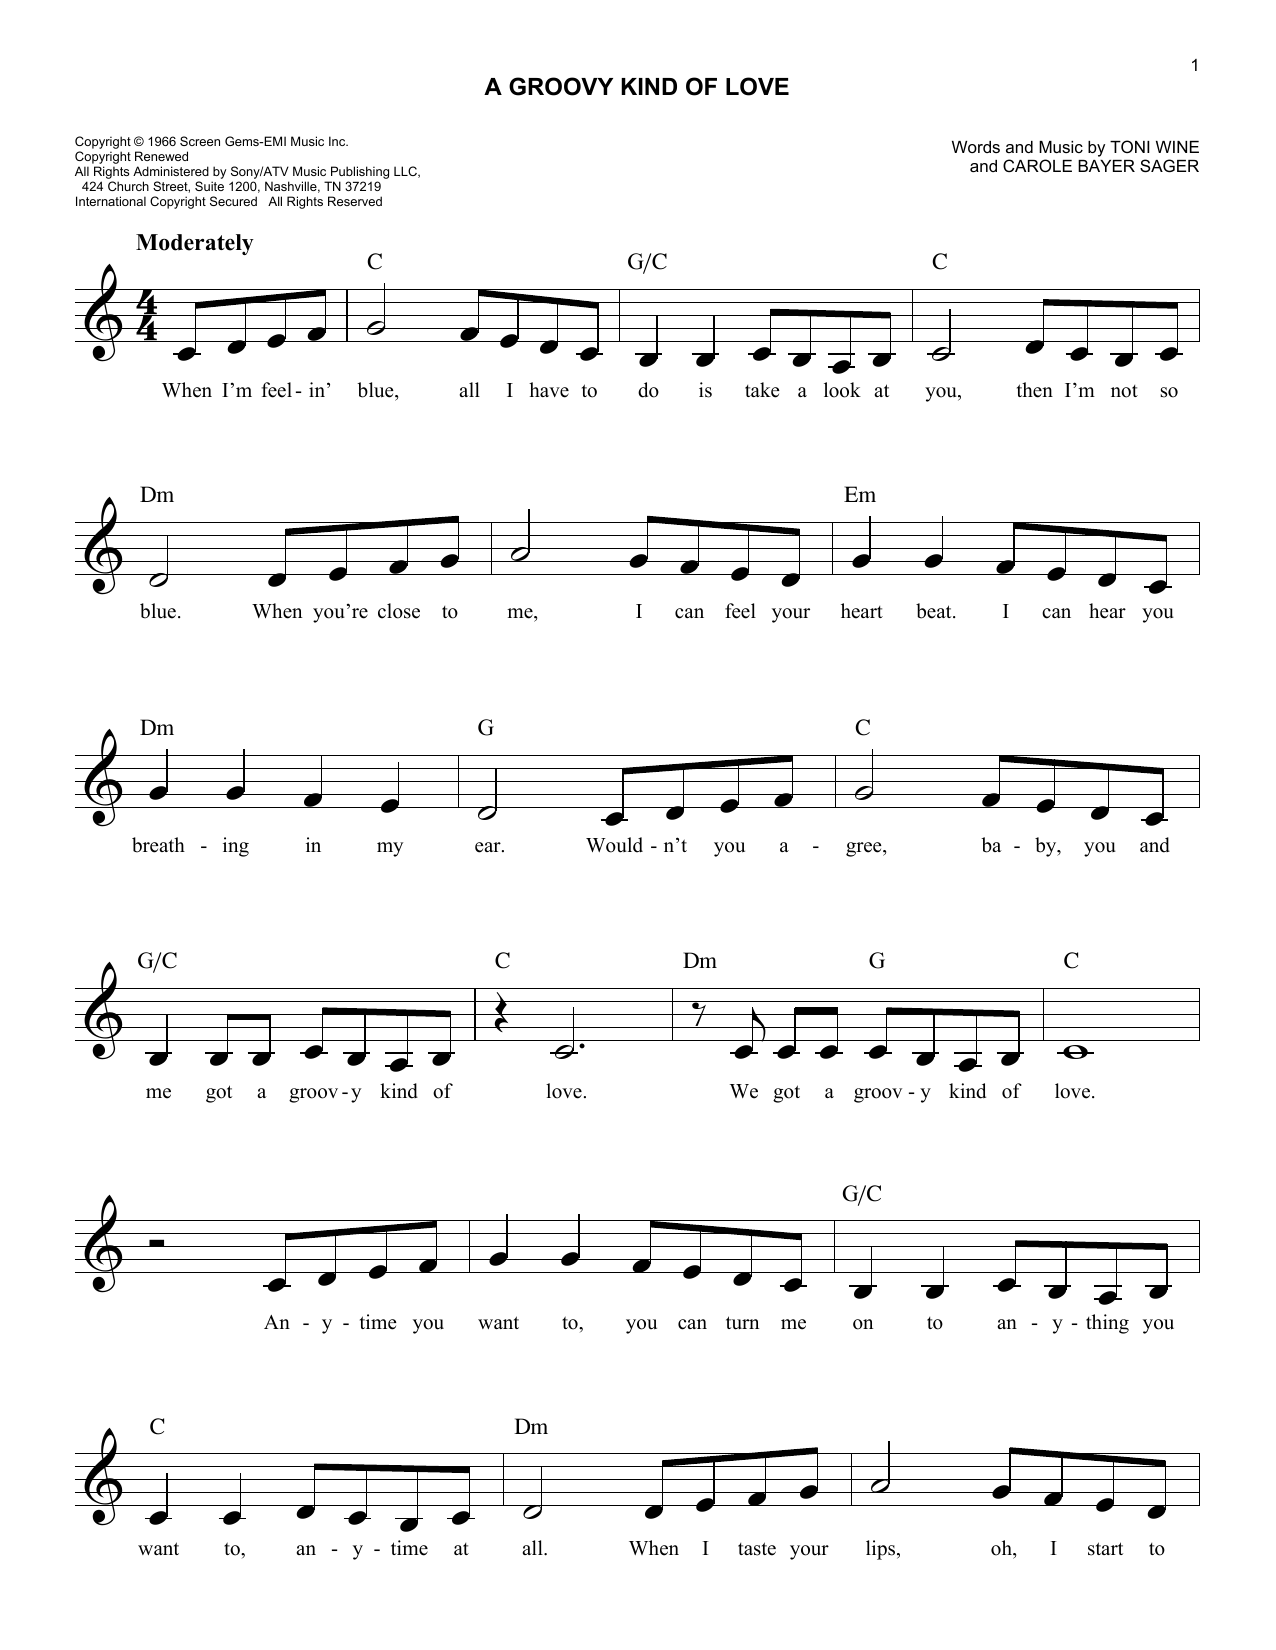 Download The Mindbenders A Groovy Kind Of Love Sheet Music